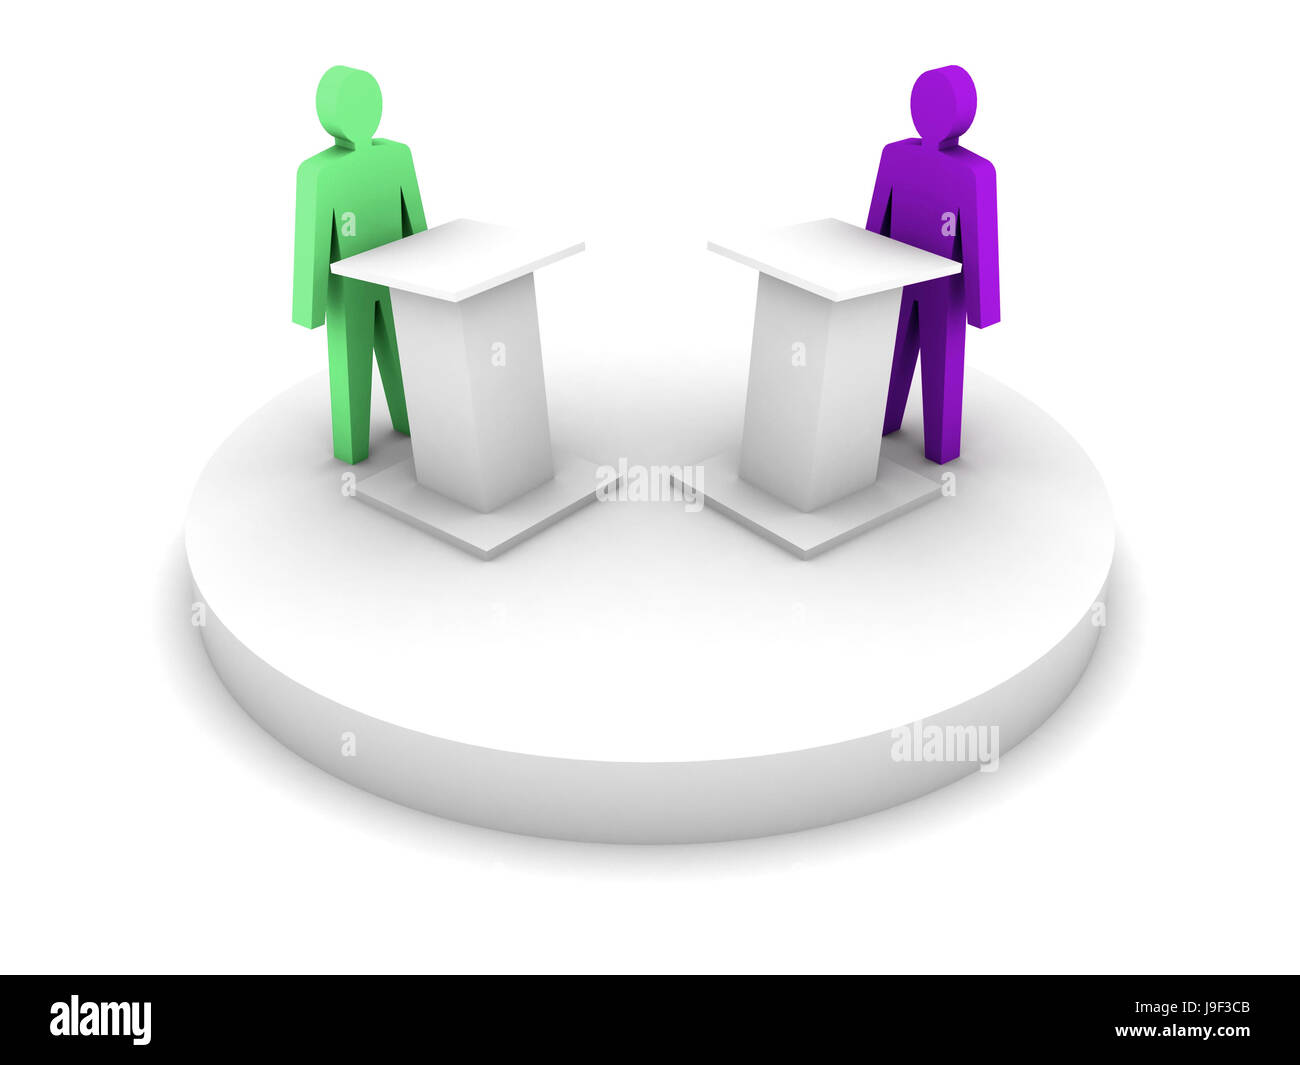 Debate. Speaking from a tribune, confrontation. Concept 3D illustration. Stock Photo